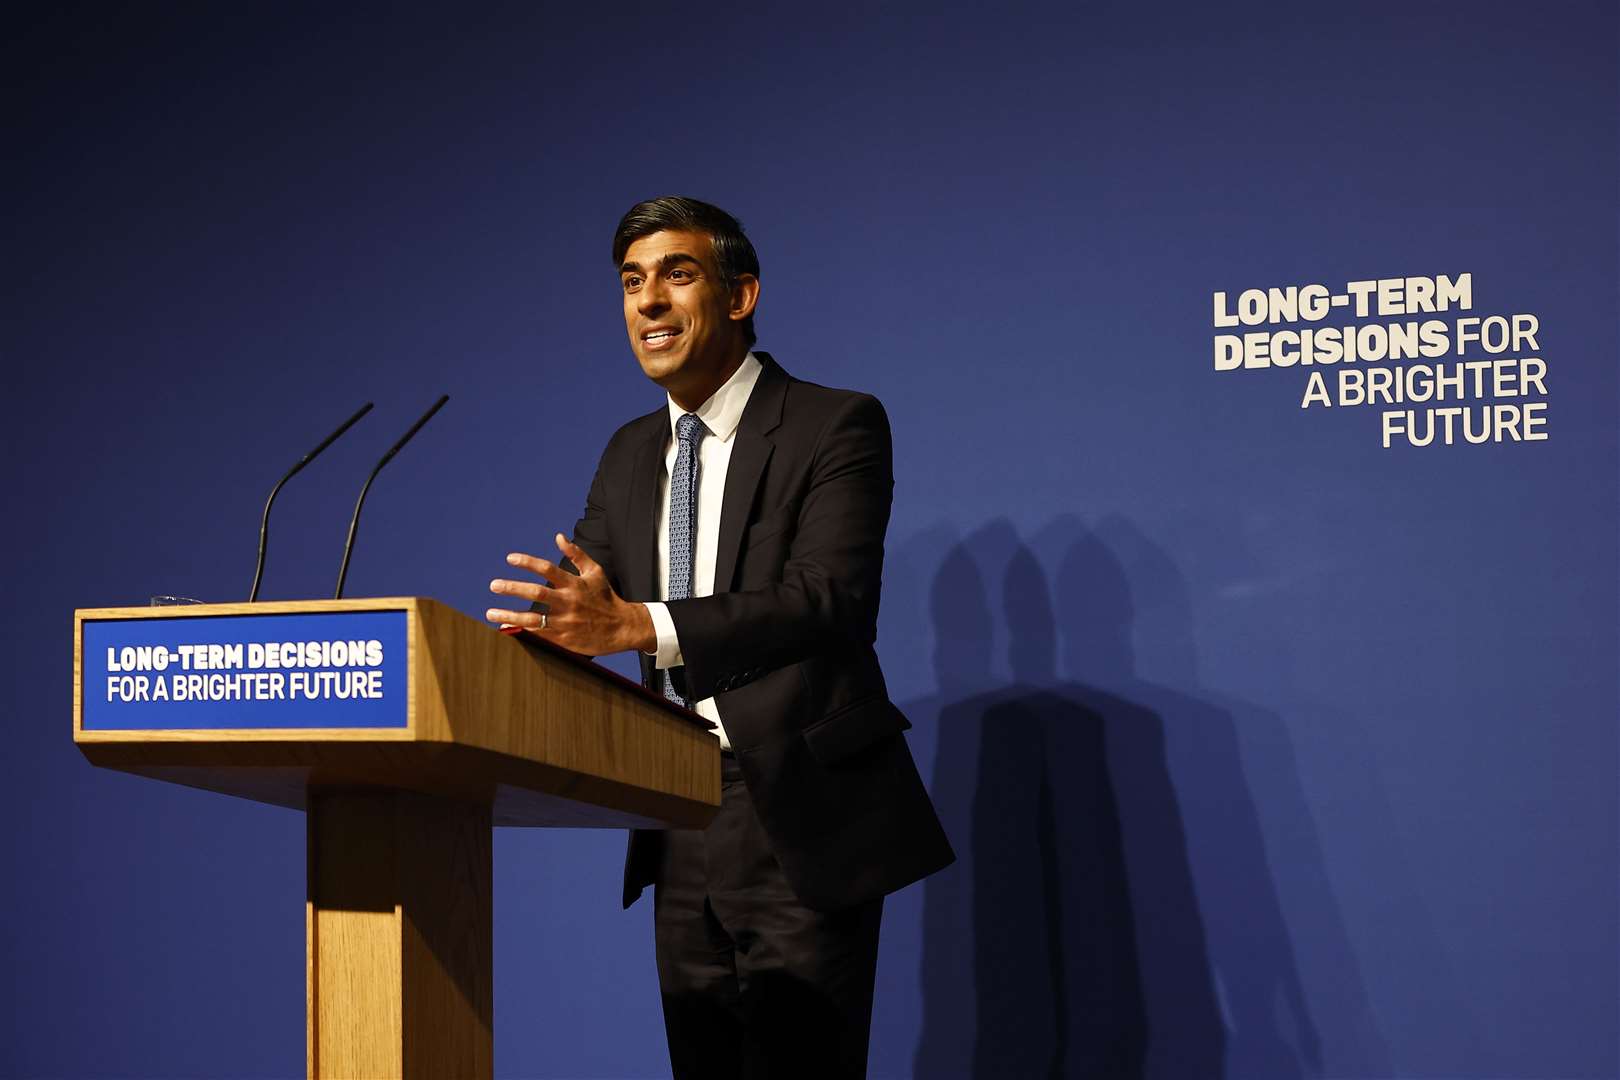 Prime Minister Rishi Sunak delivers a speech at the Royal Society in London setting out how he will address the dangers presented by AI while harnessing its benefits (Peter Nicholls/PA)